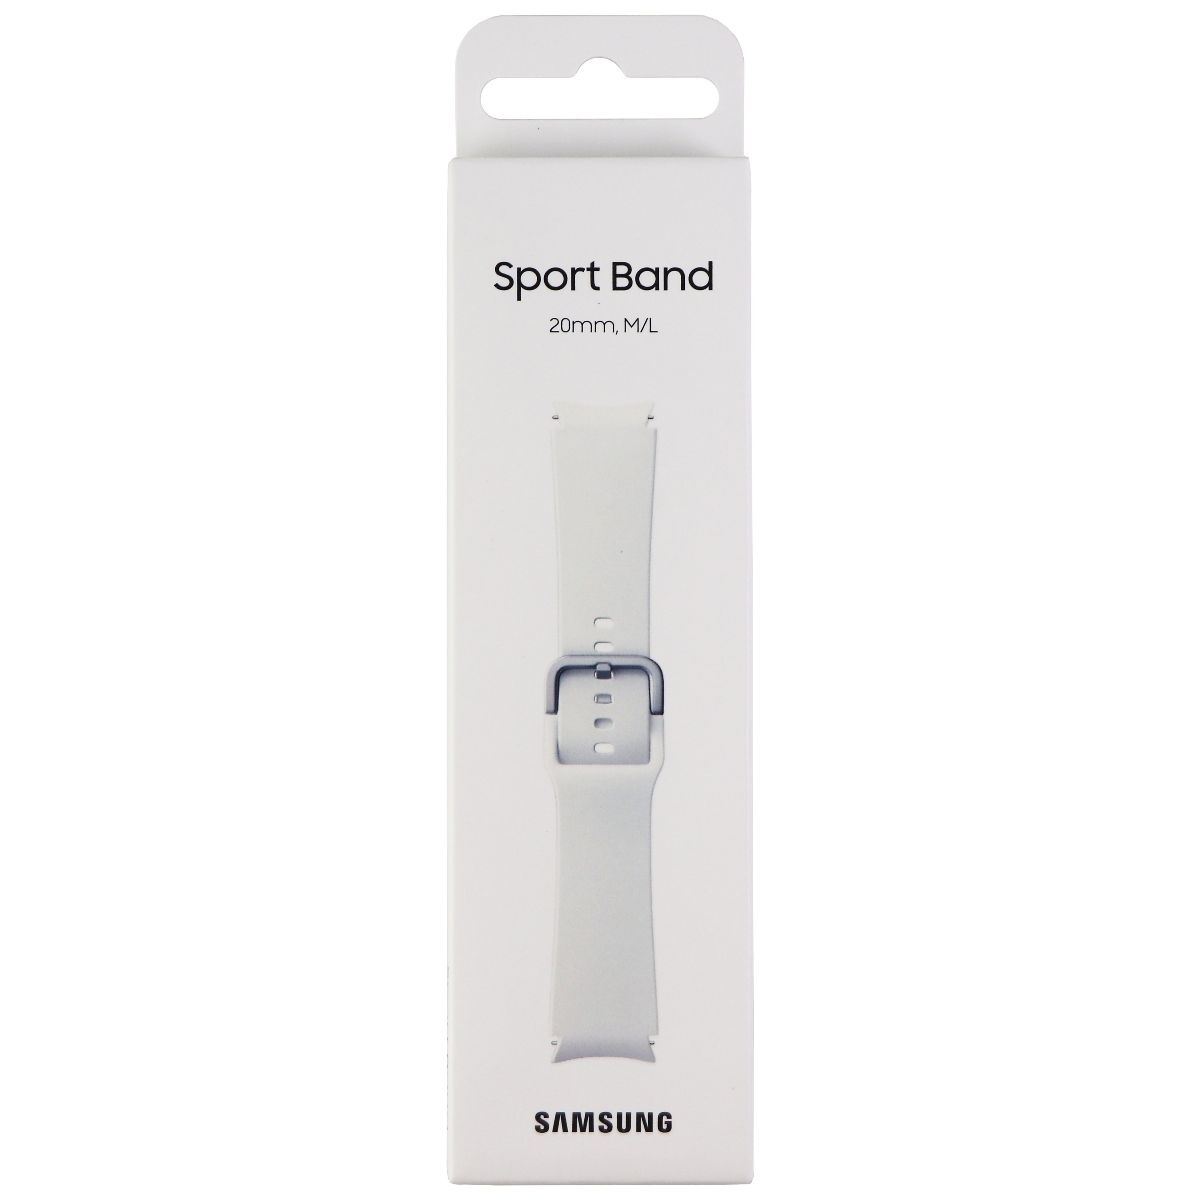 Samsung Sport Band For Galaxy Watch4 & Later - White (20mm) M/L